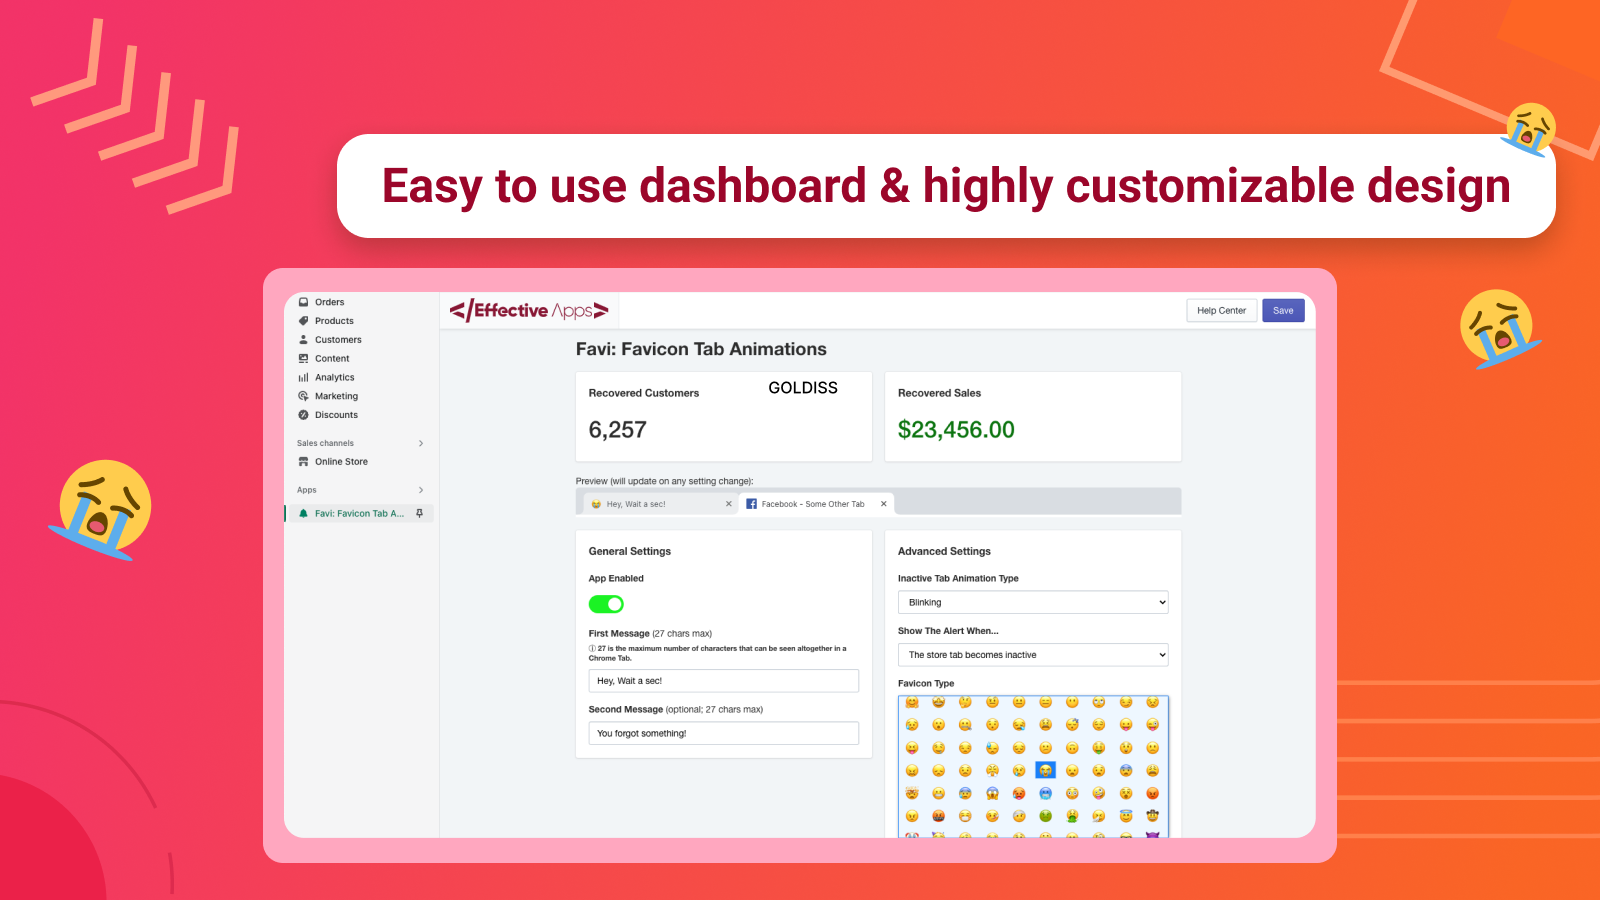 The dashboard of the app with sales and recovered cart stats